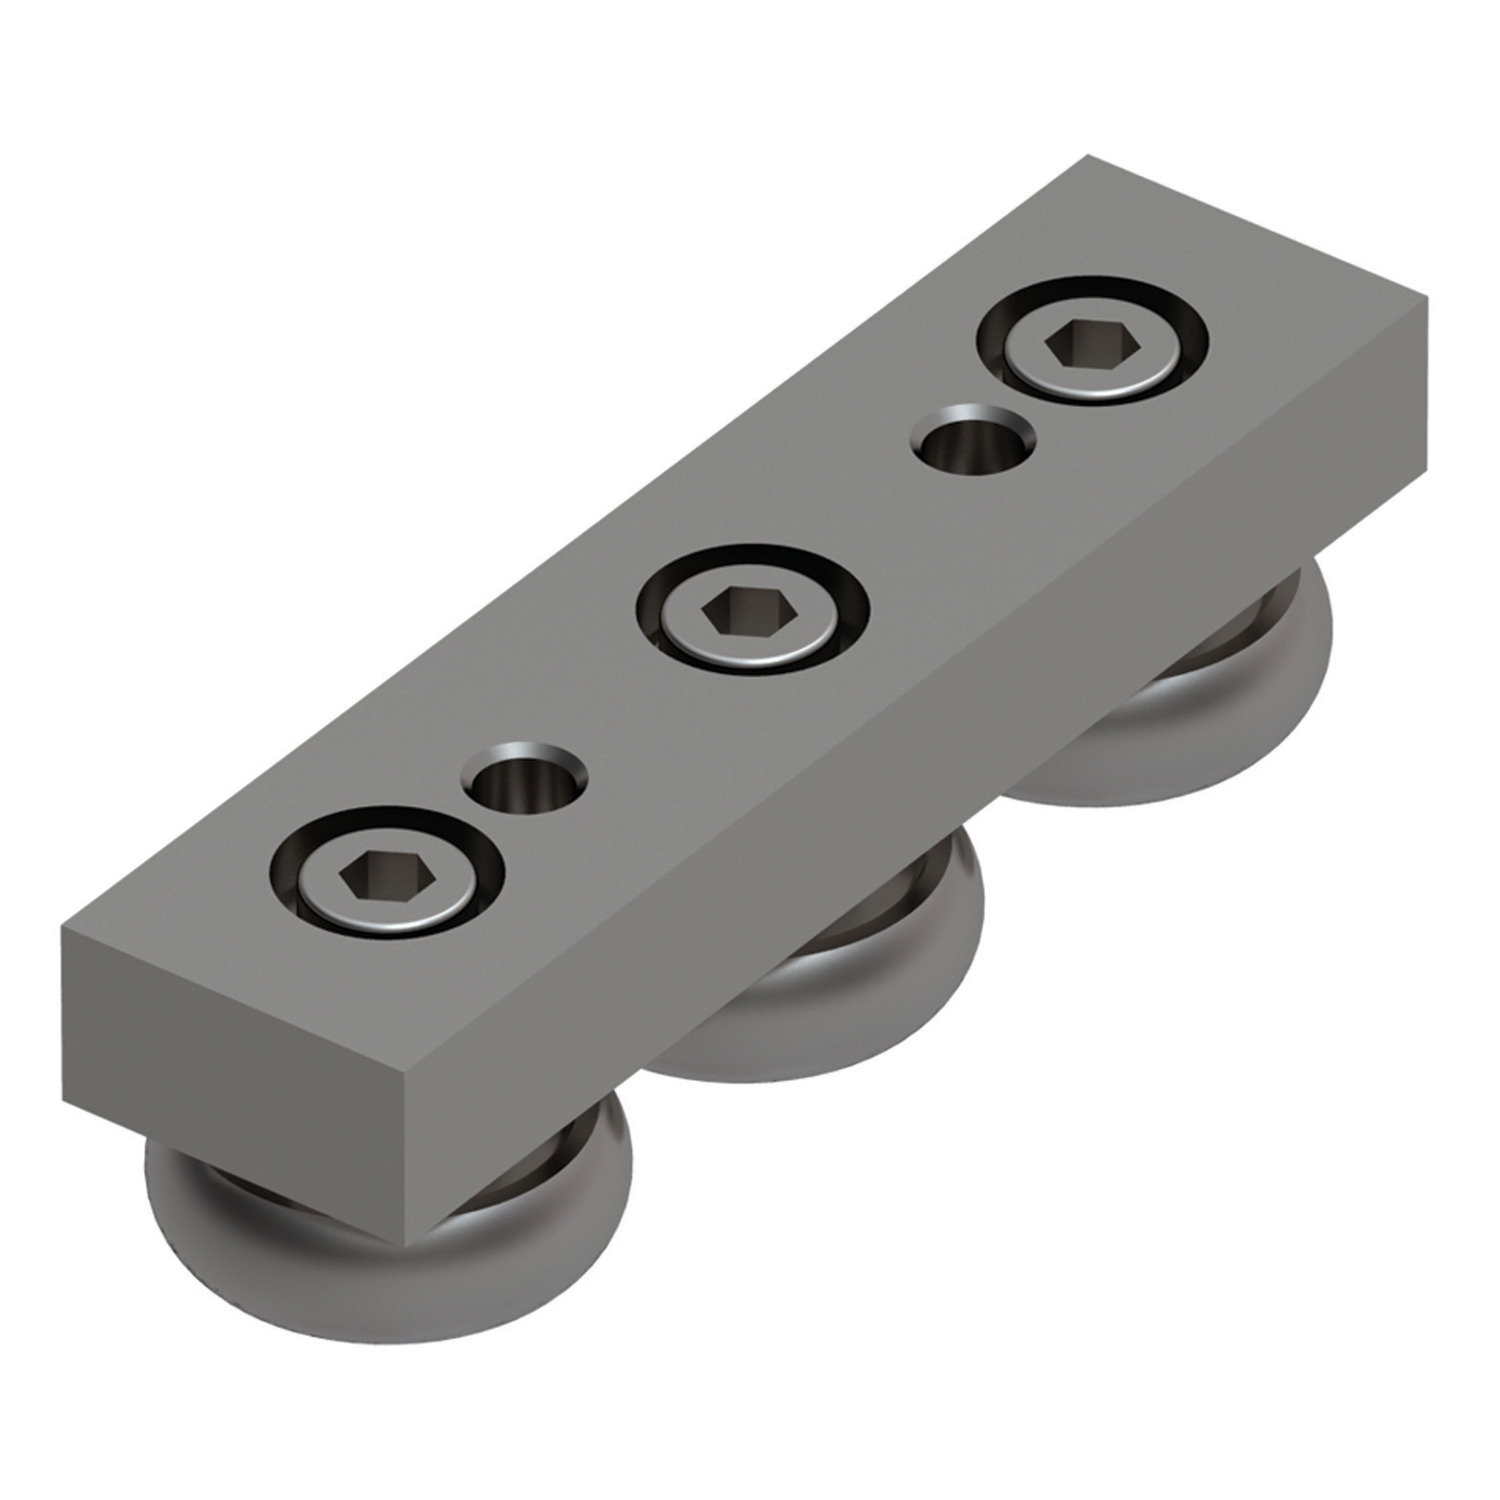 L1971.40T-135 Low profile sliders for stainless X rail 